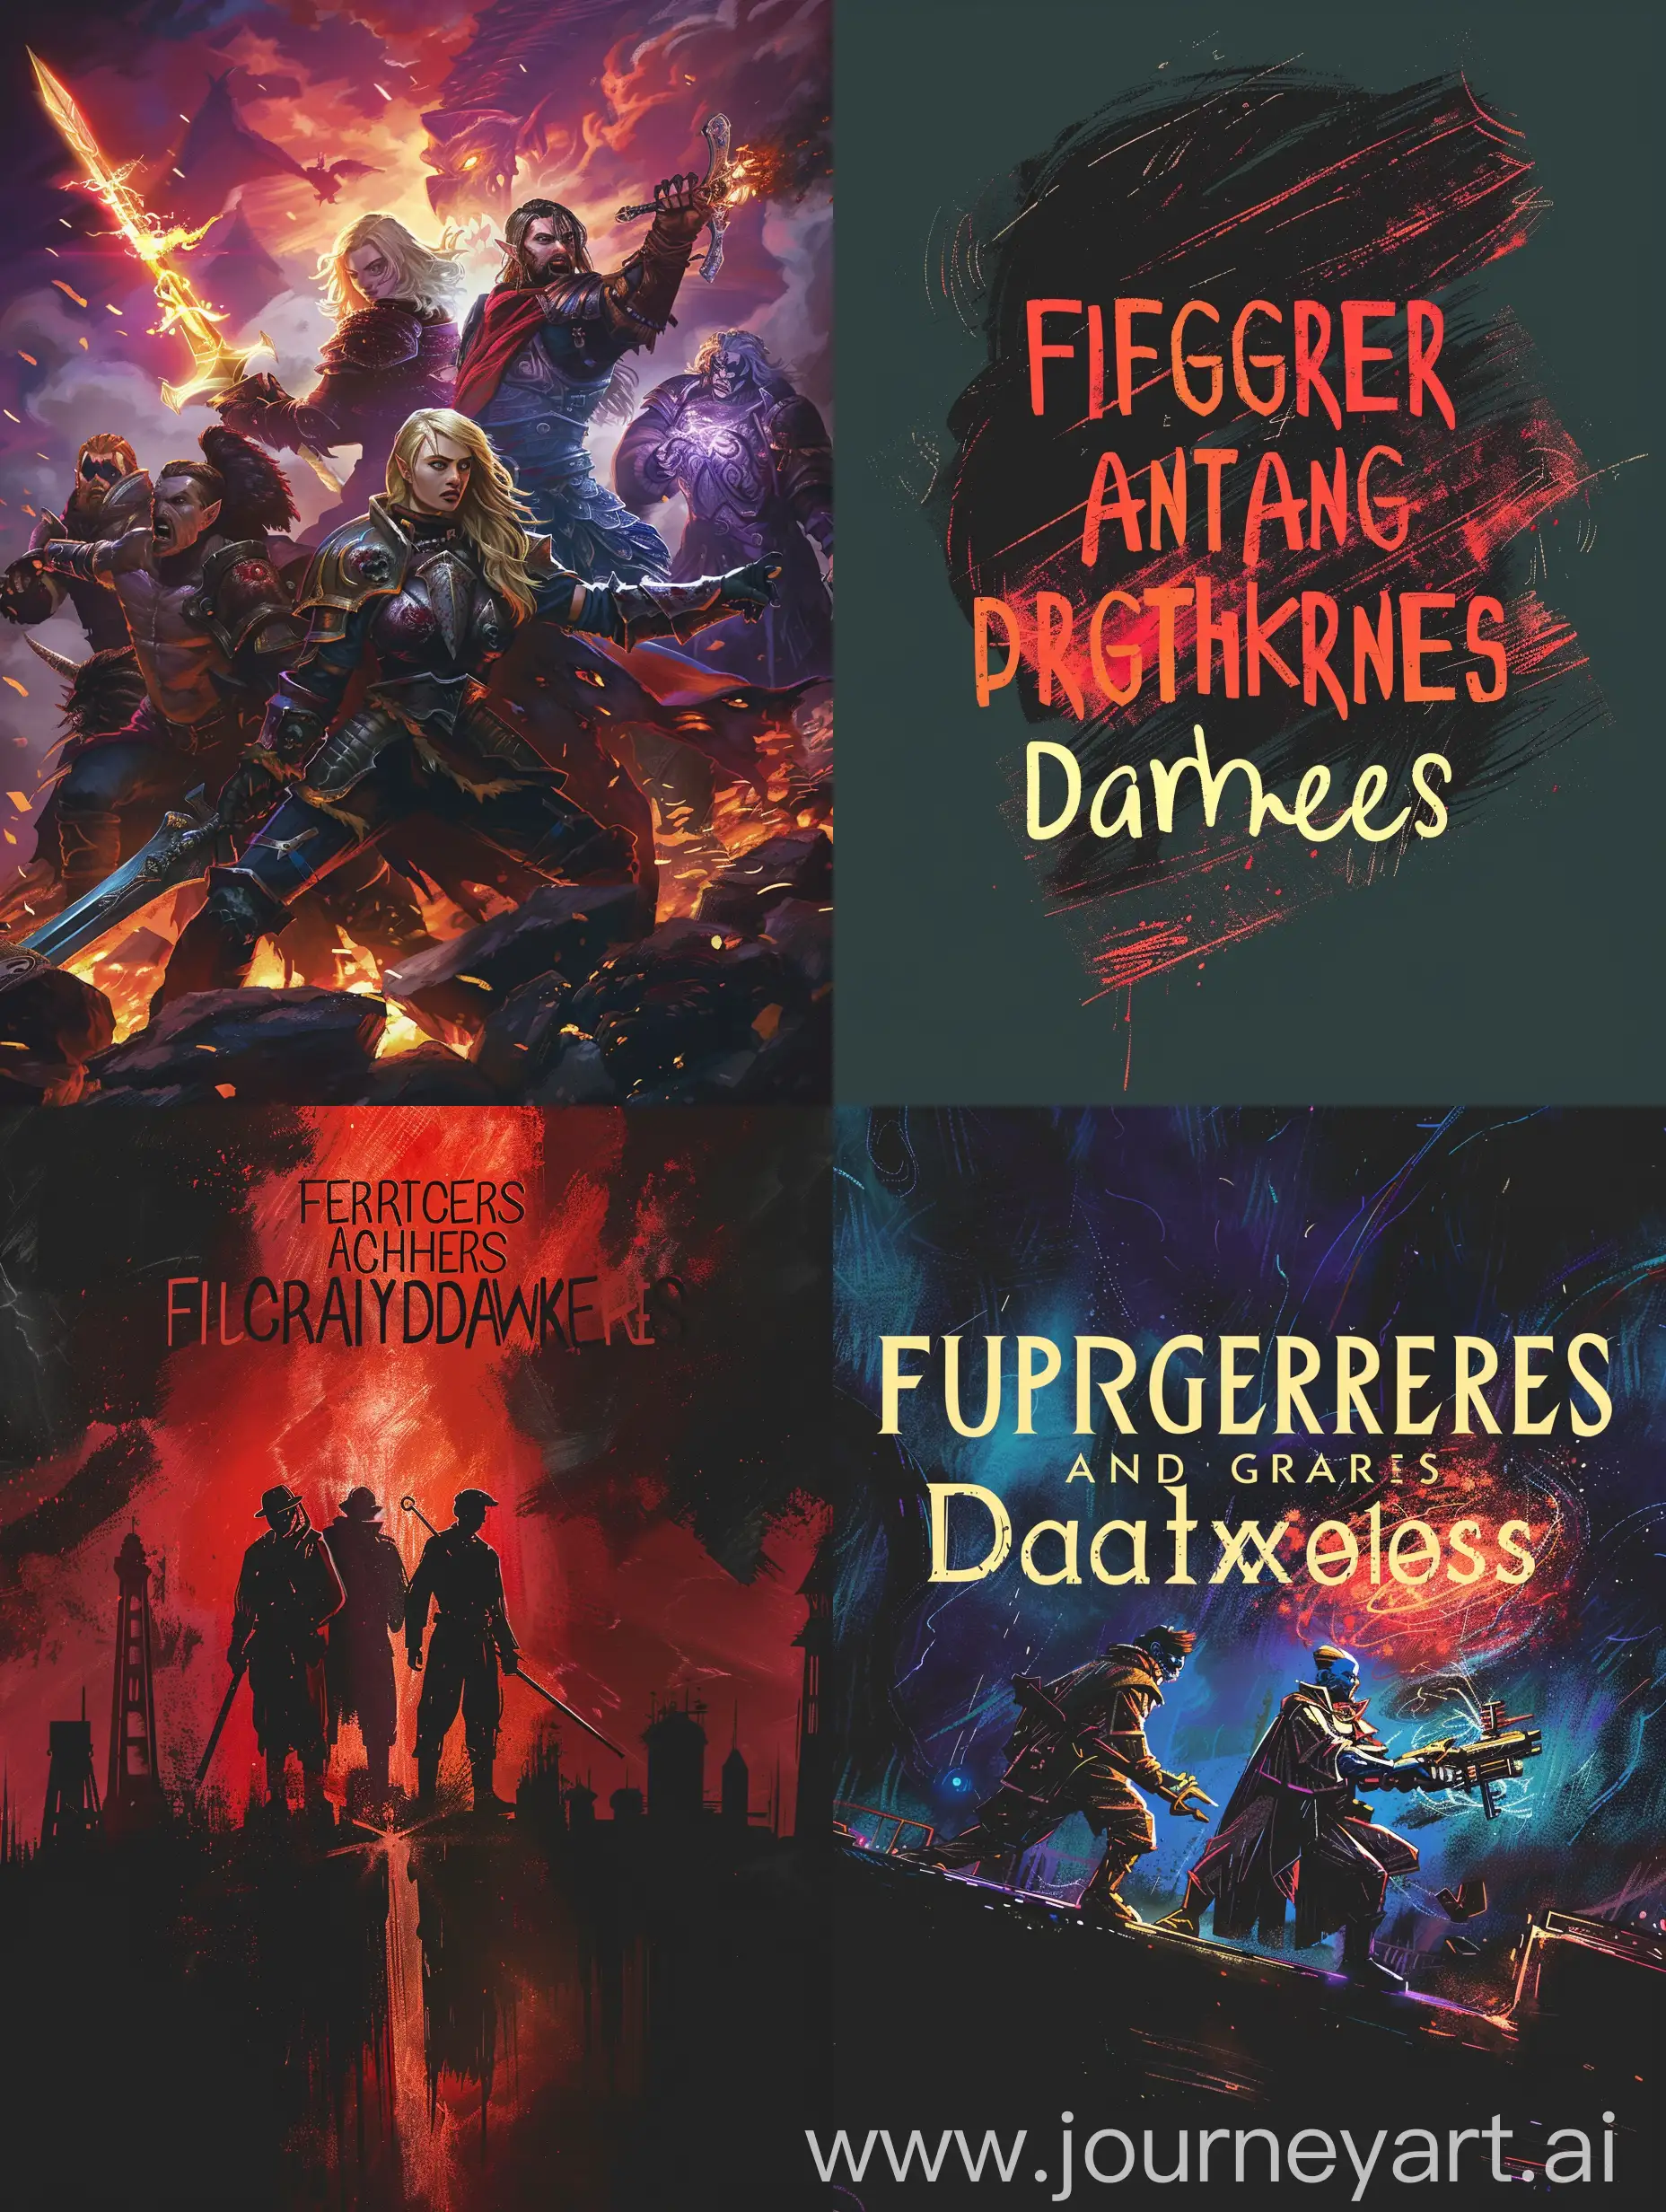 Do a design for the cover of my book "Fighters Against Darkness"